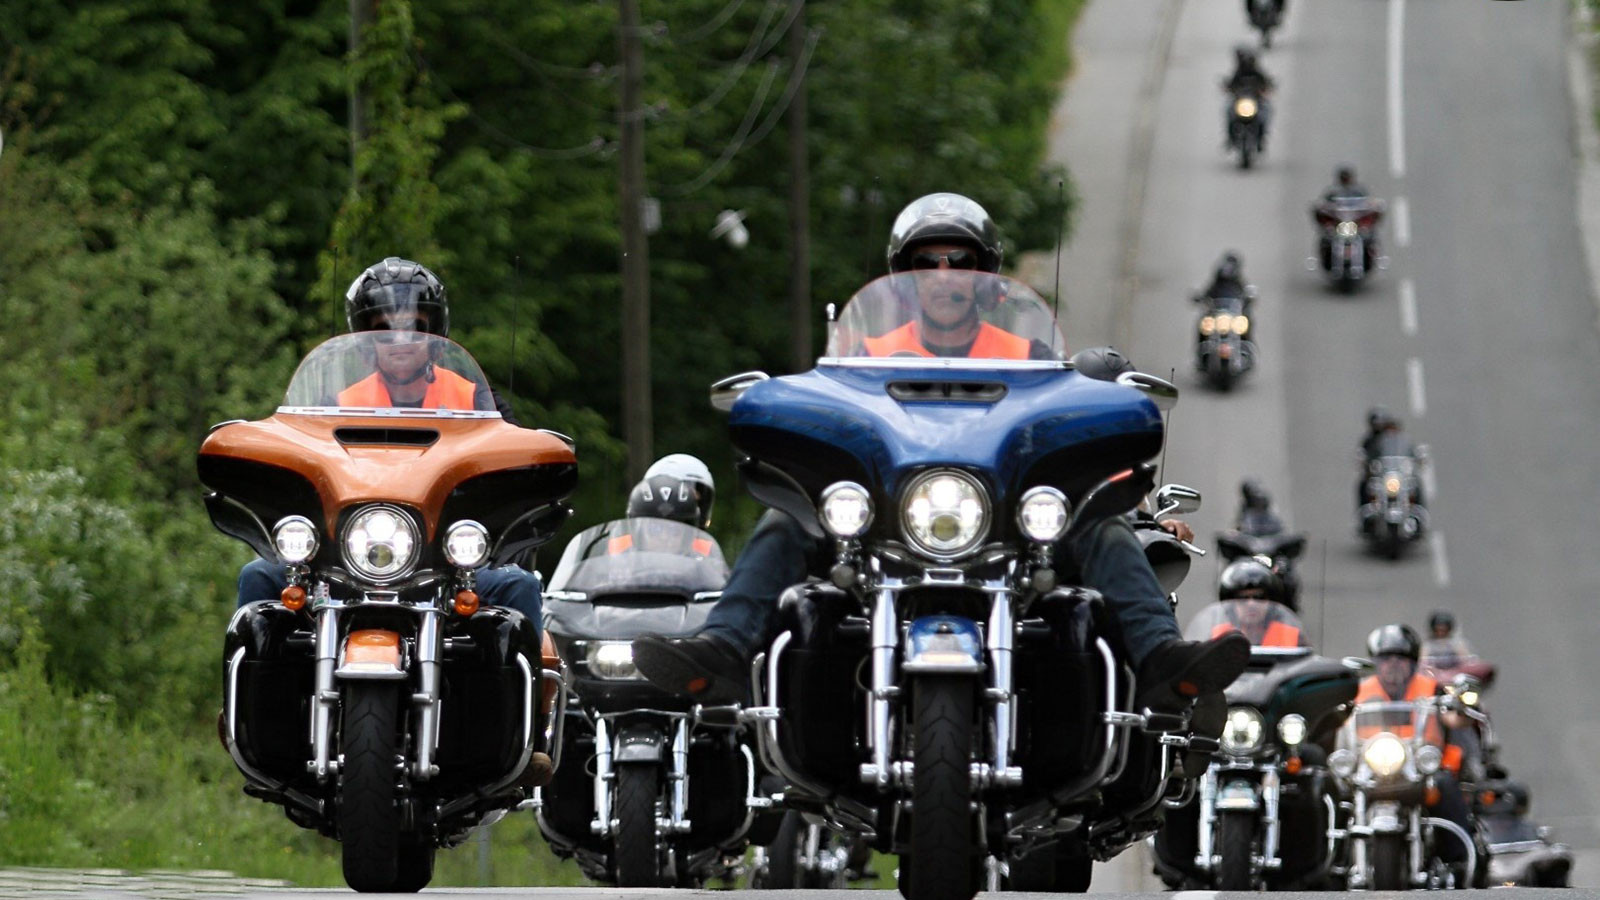 A view of H-D riders riding together on the highway